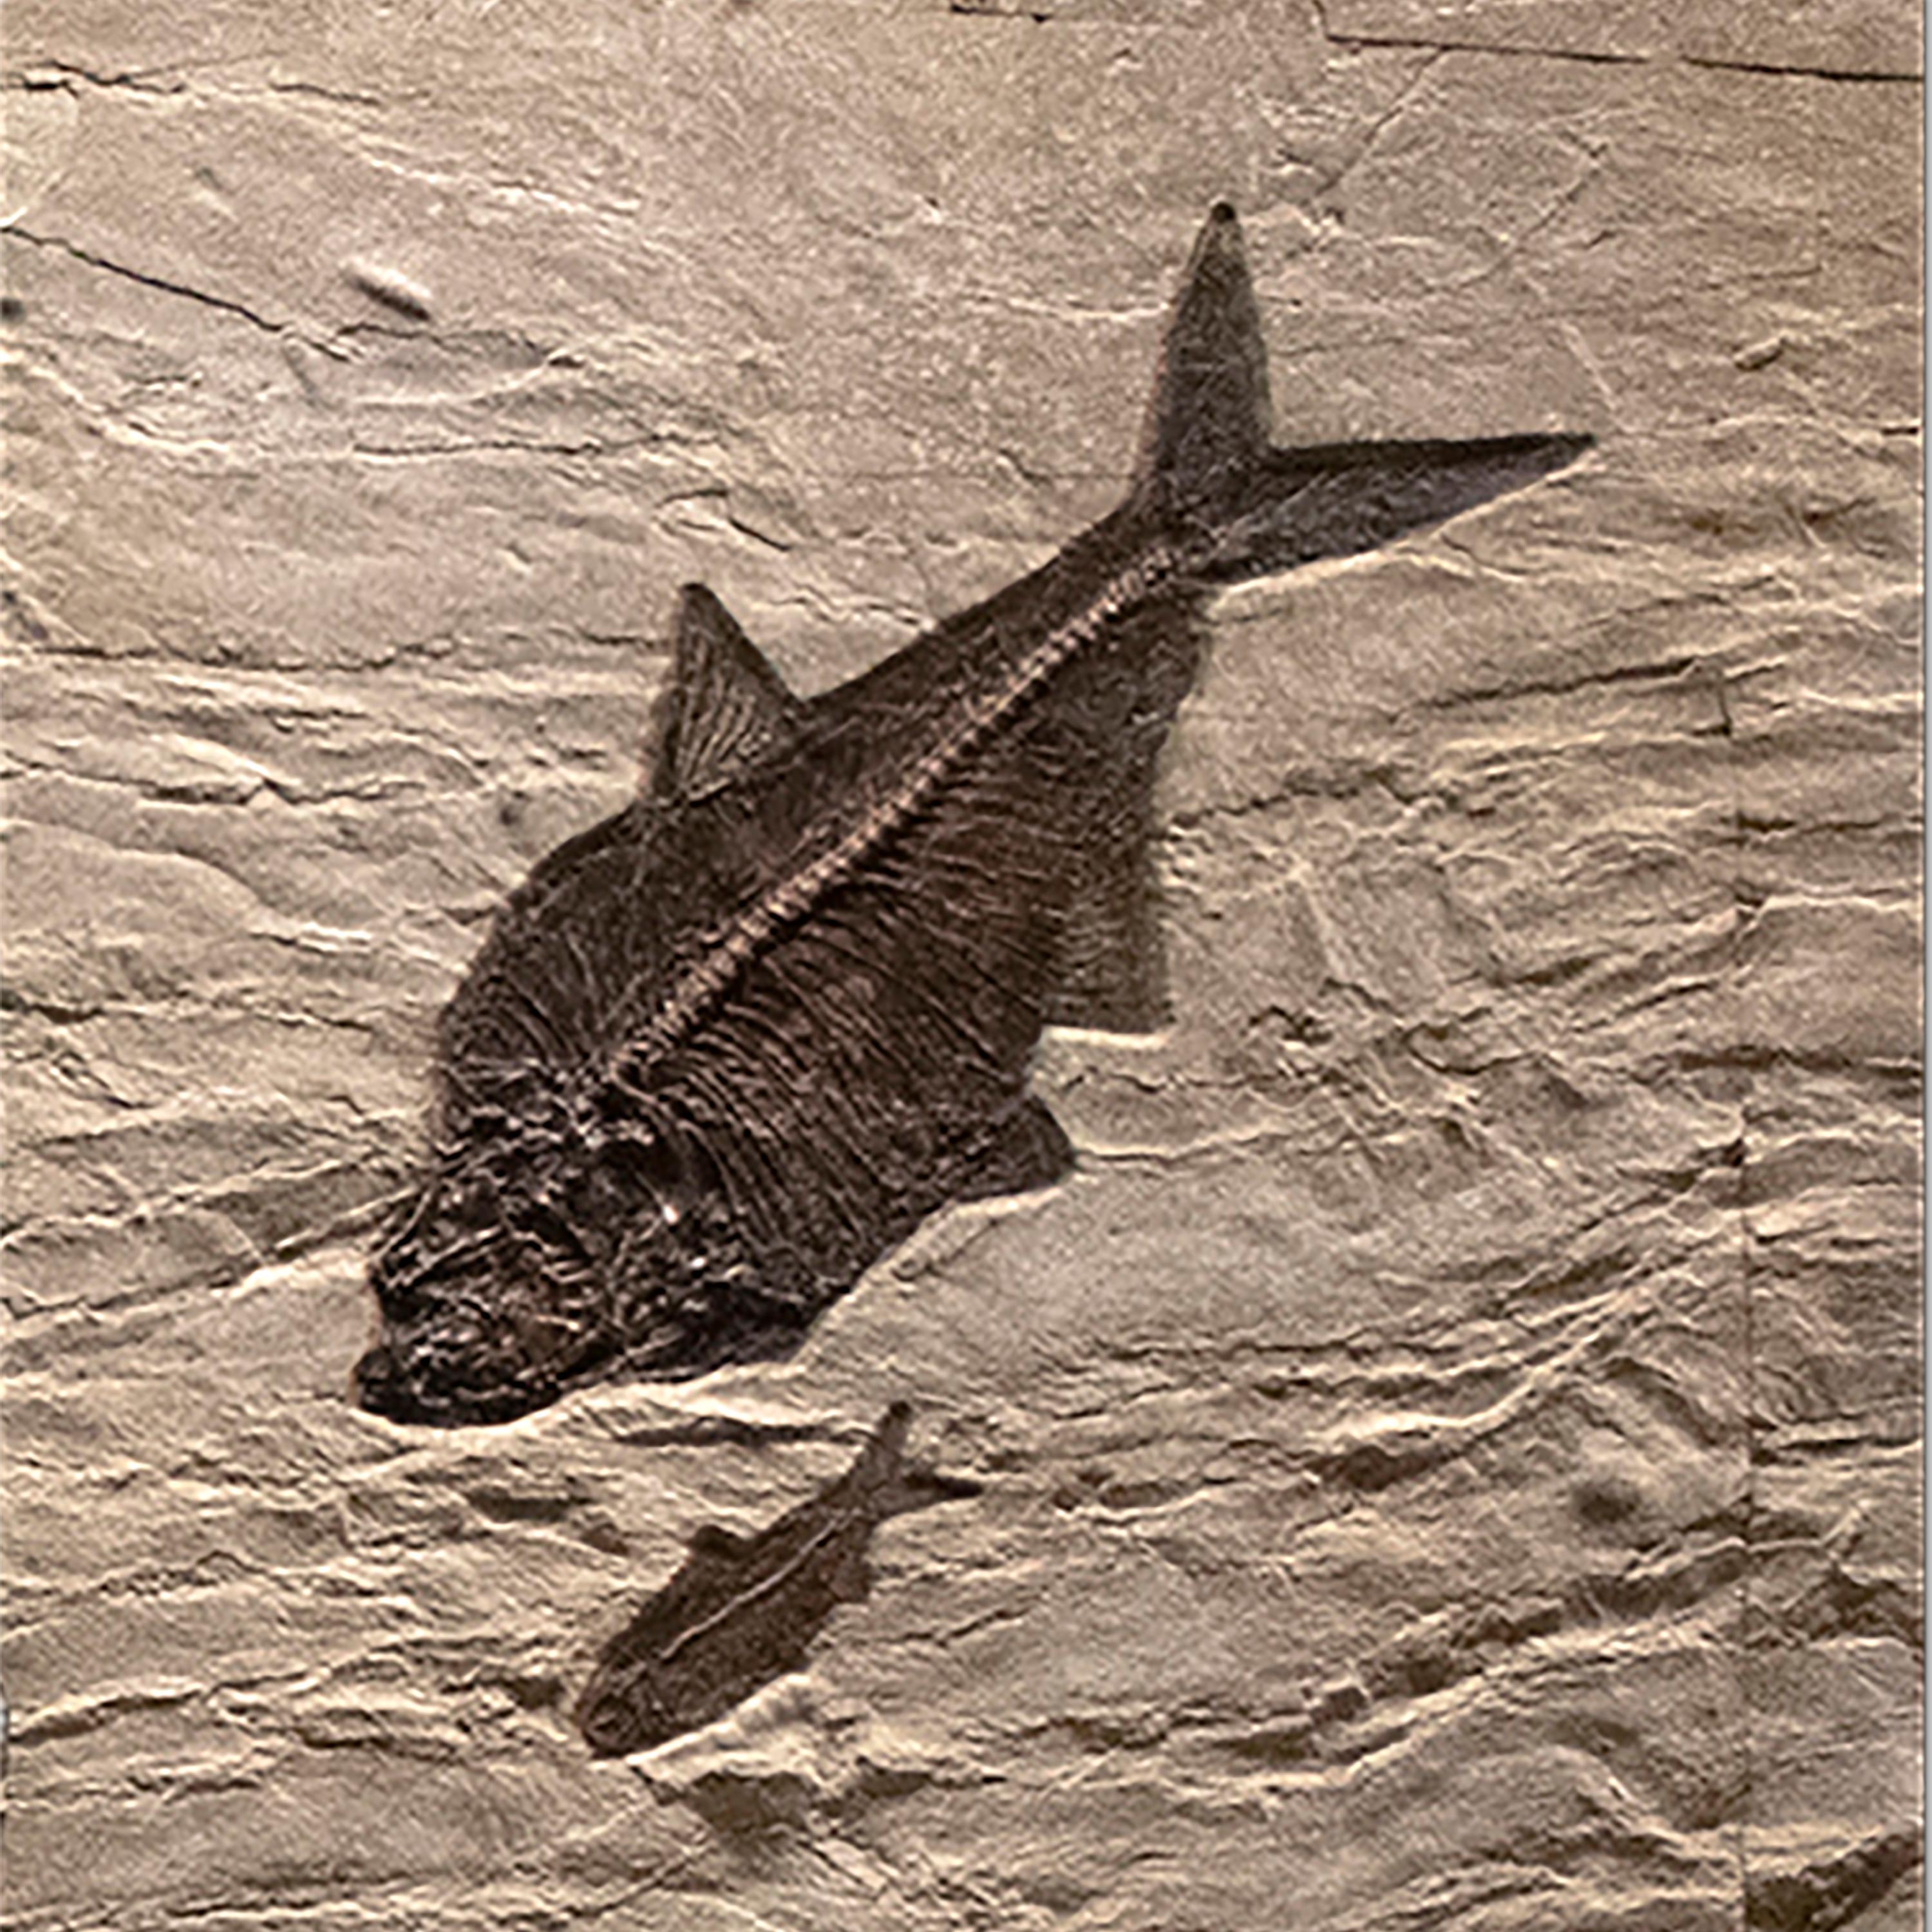 50 Million Year Old Eocene Era Fossil Fish Triptych Mural in Stone, from Wyoming 1